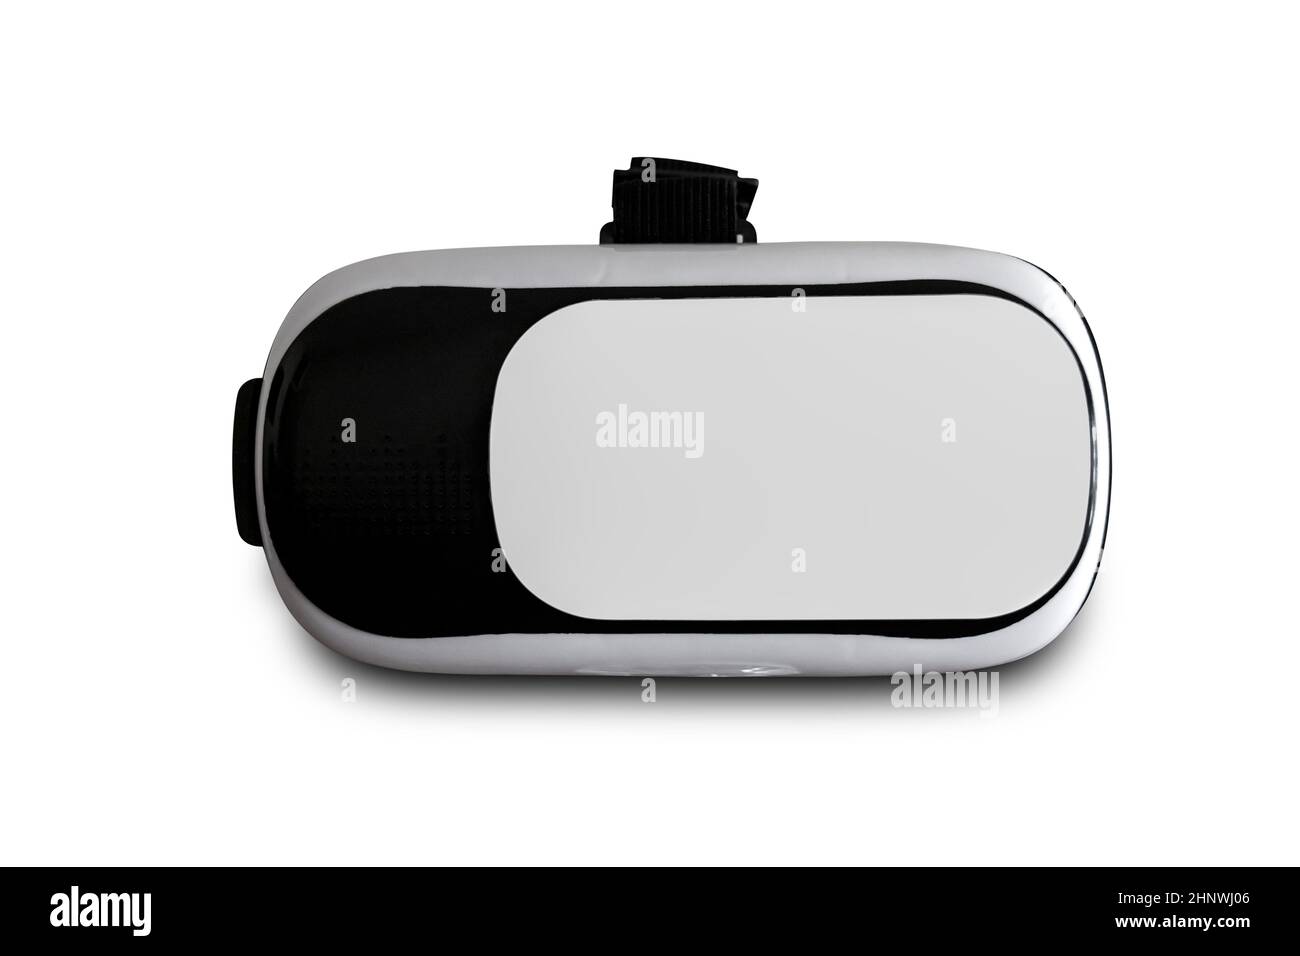 VR camera glasses smartphone isolated on a white background with clipping path. Stock Photo